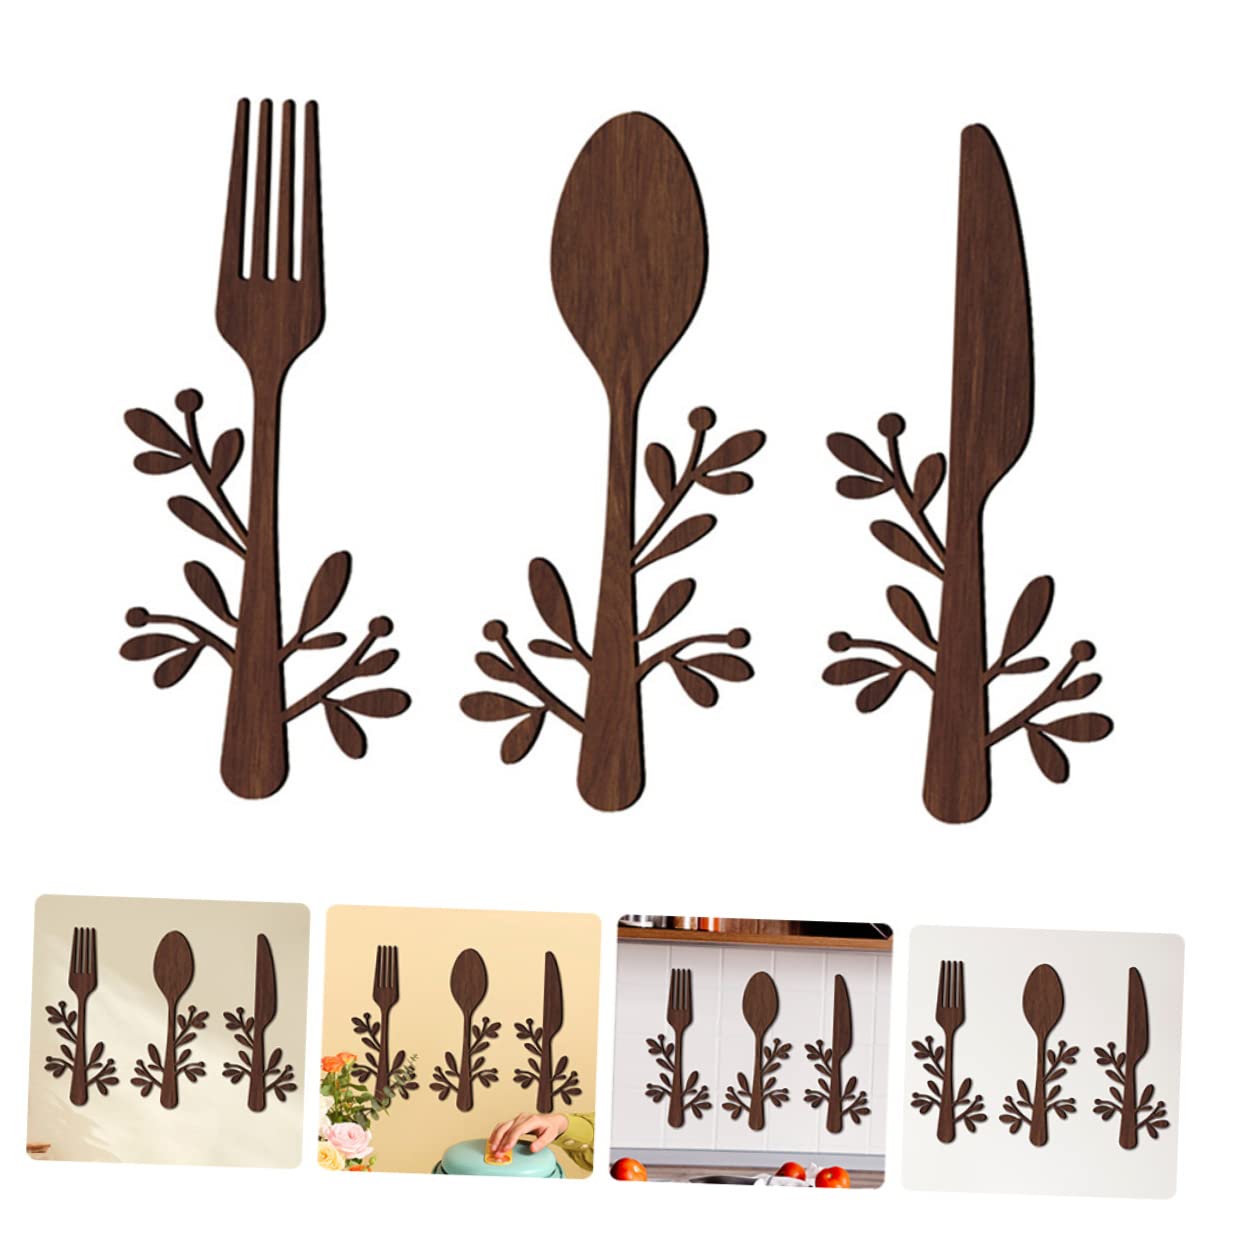 Yardenfun 3pcs Wooden and Fork Pendant Kitchen Utensils Wall Sign Fork and Spoon Wall Decor Wood Spoon Fork Sign Farmhouse Wooden Wall Plaque Country Home Decor Basswood Metallic Line